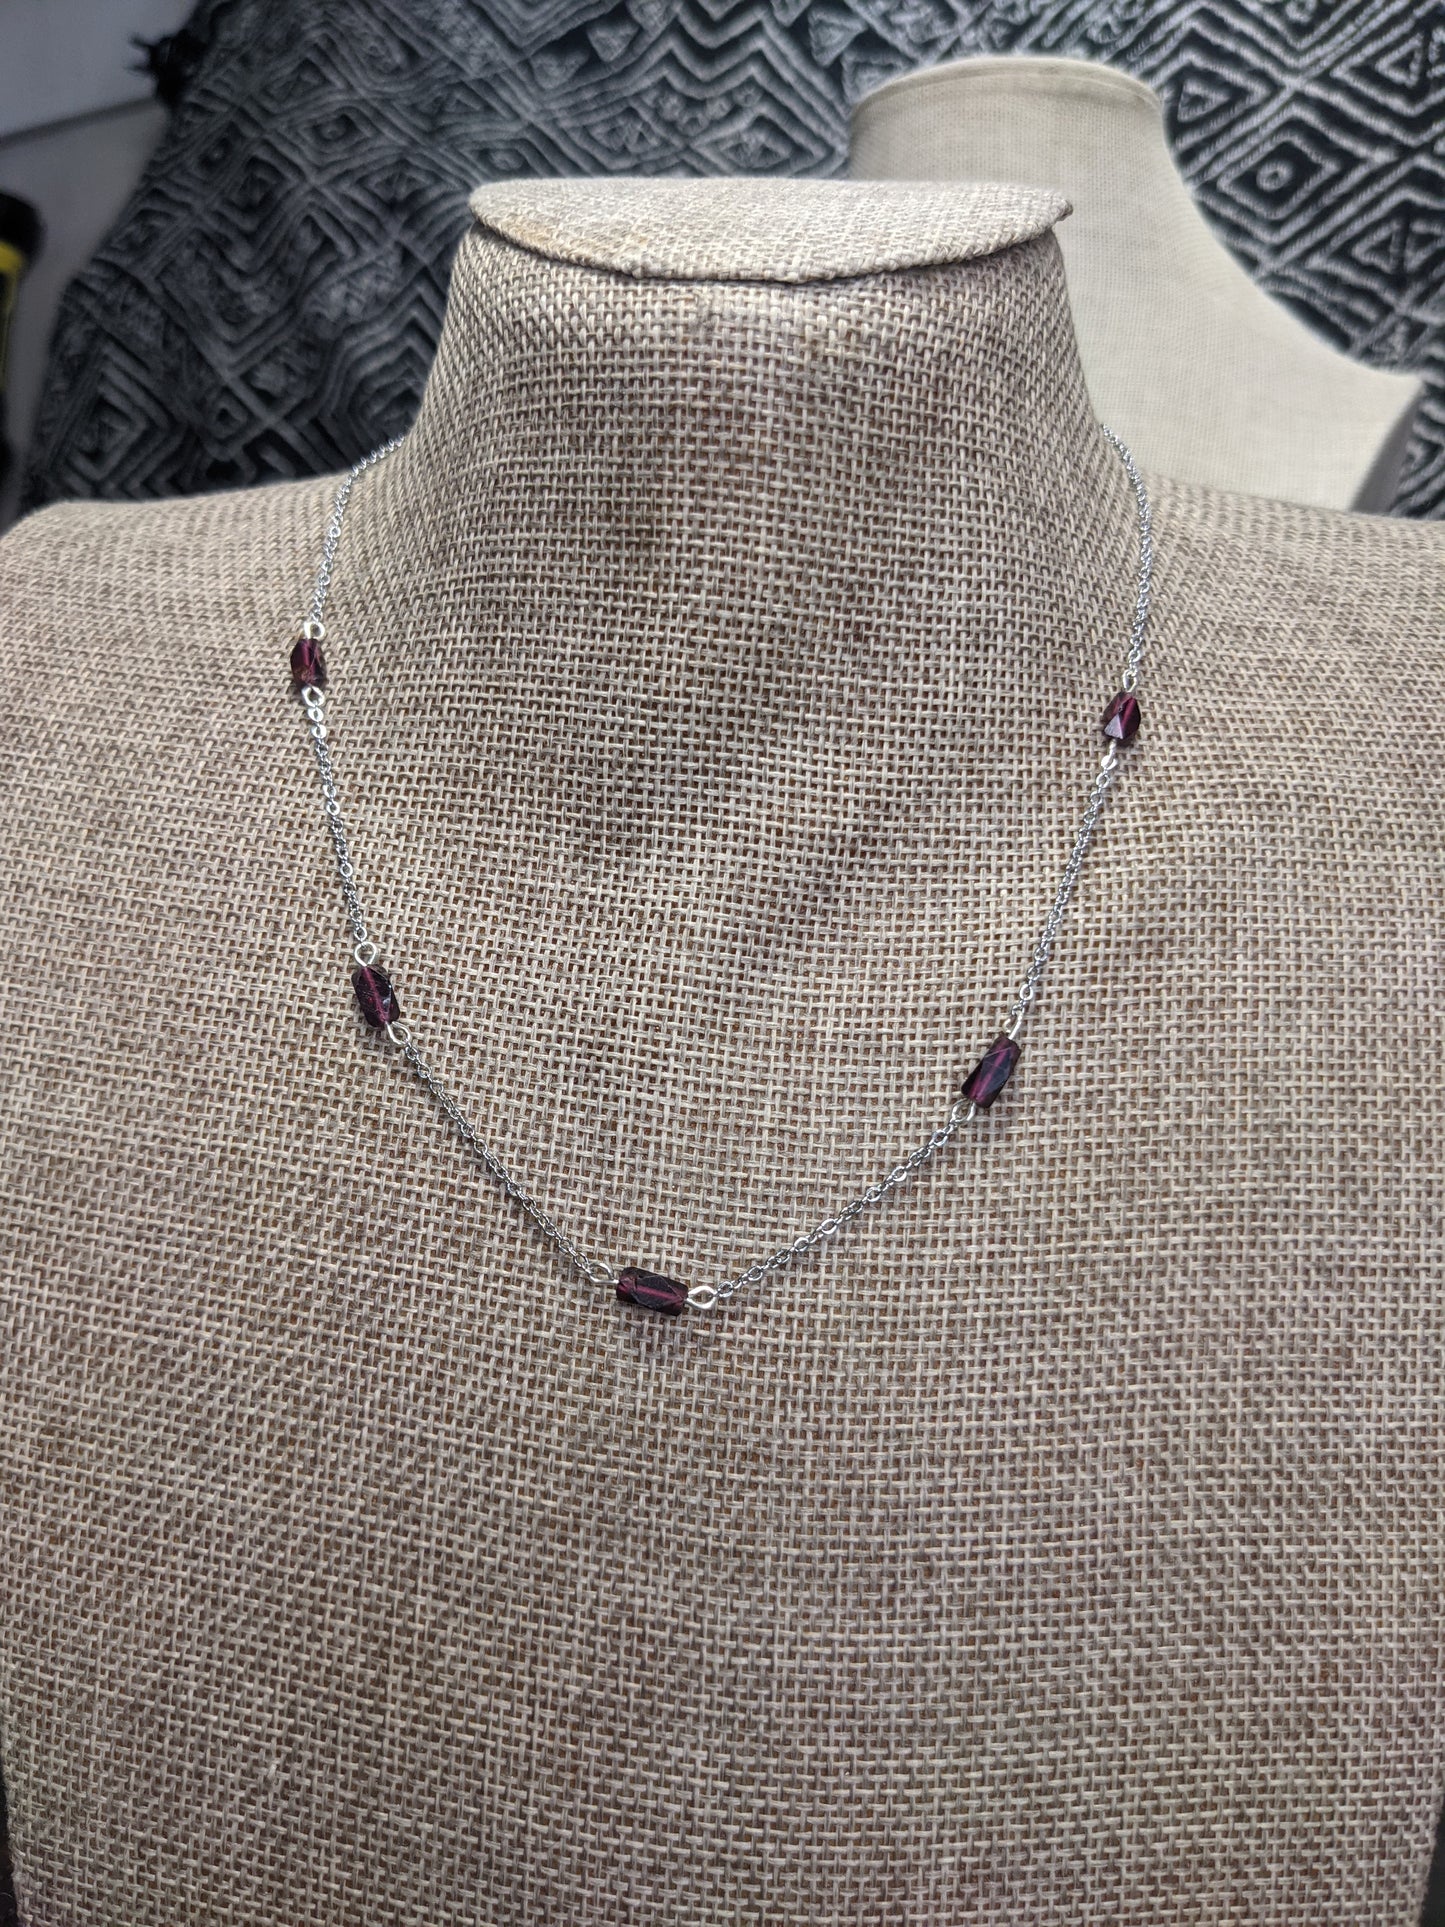 Dainty Garnet Necklace on Stainless Chain